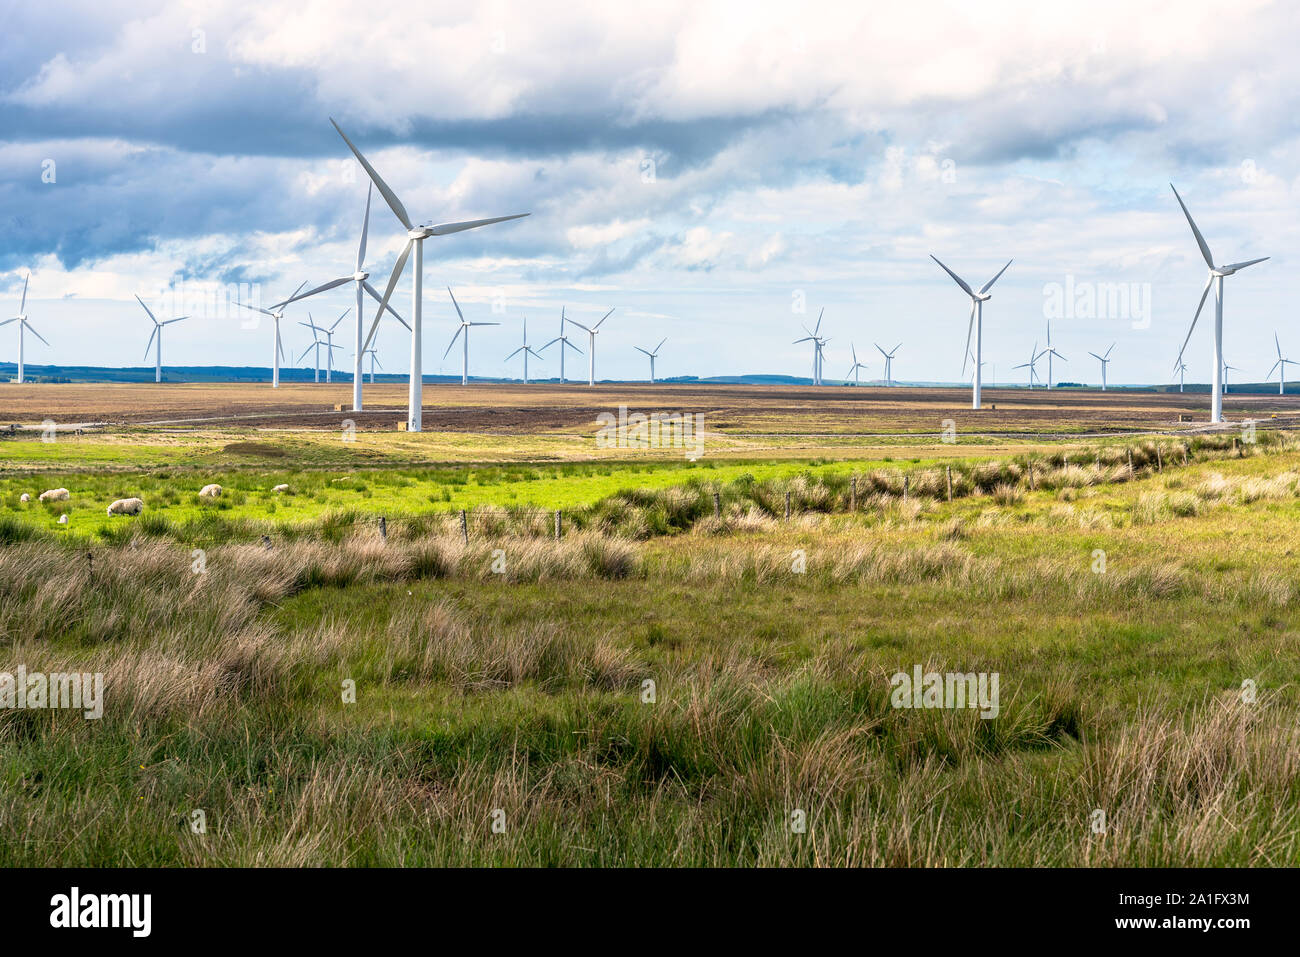 Wind farm in the countriside of Scotland on a cloudy spring day. Grazing sheep are visible in foreground. Stock Photo